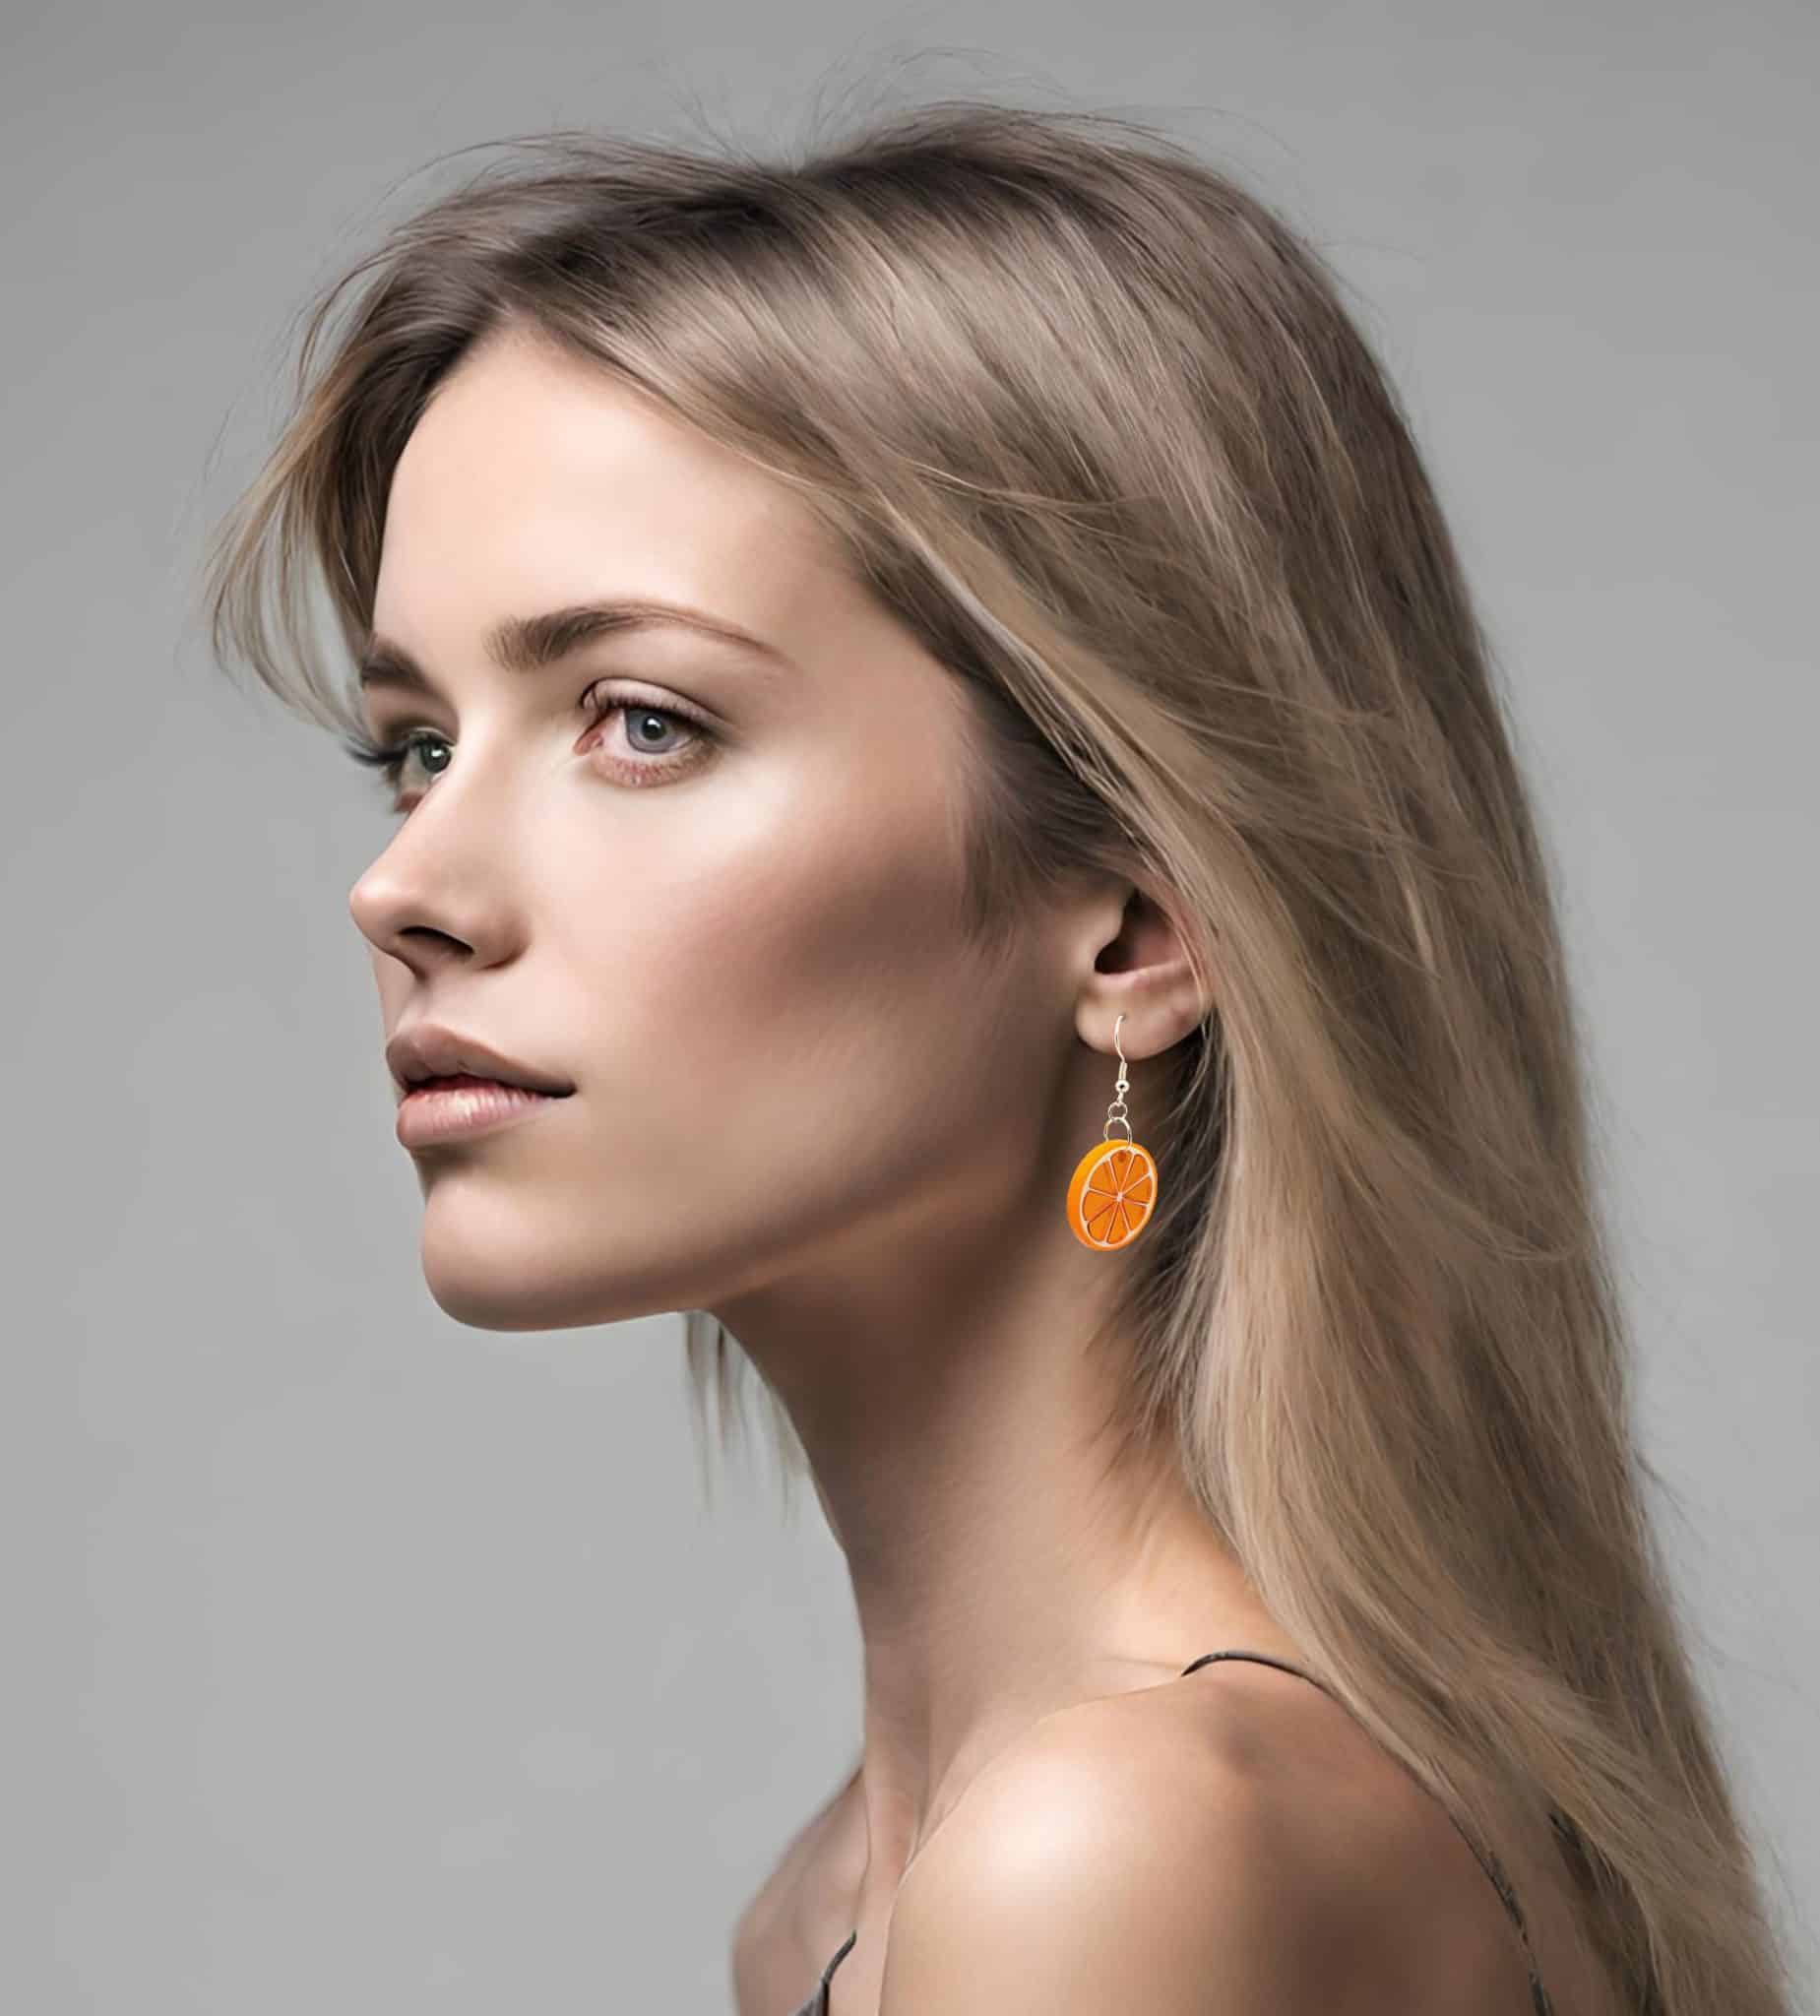 Young woman wearing hand made Orange Fruit Earrings by Marquise Jewellery